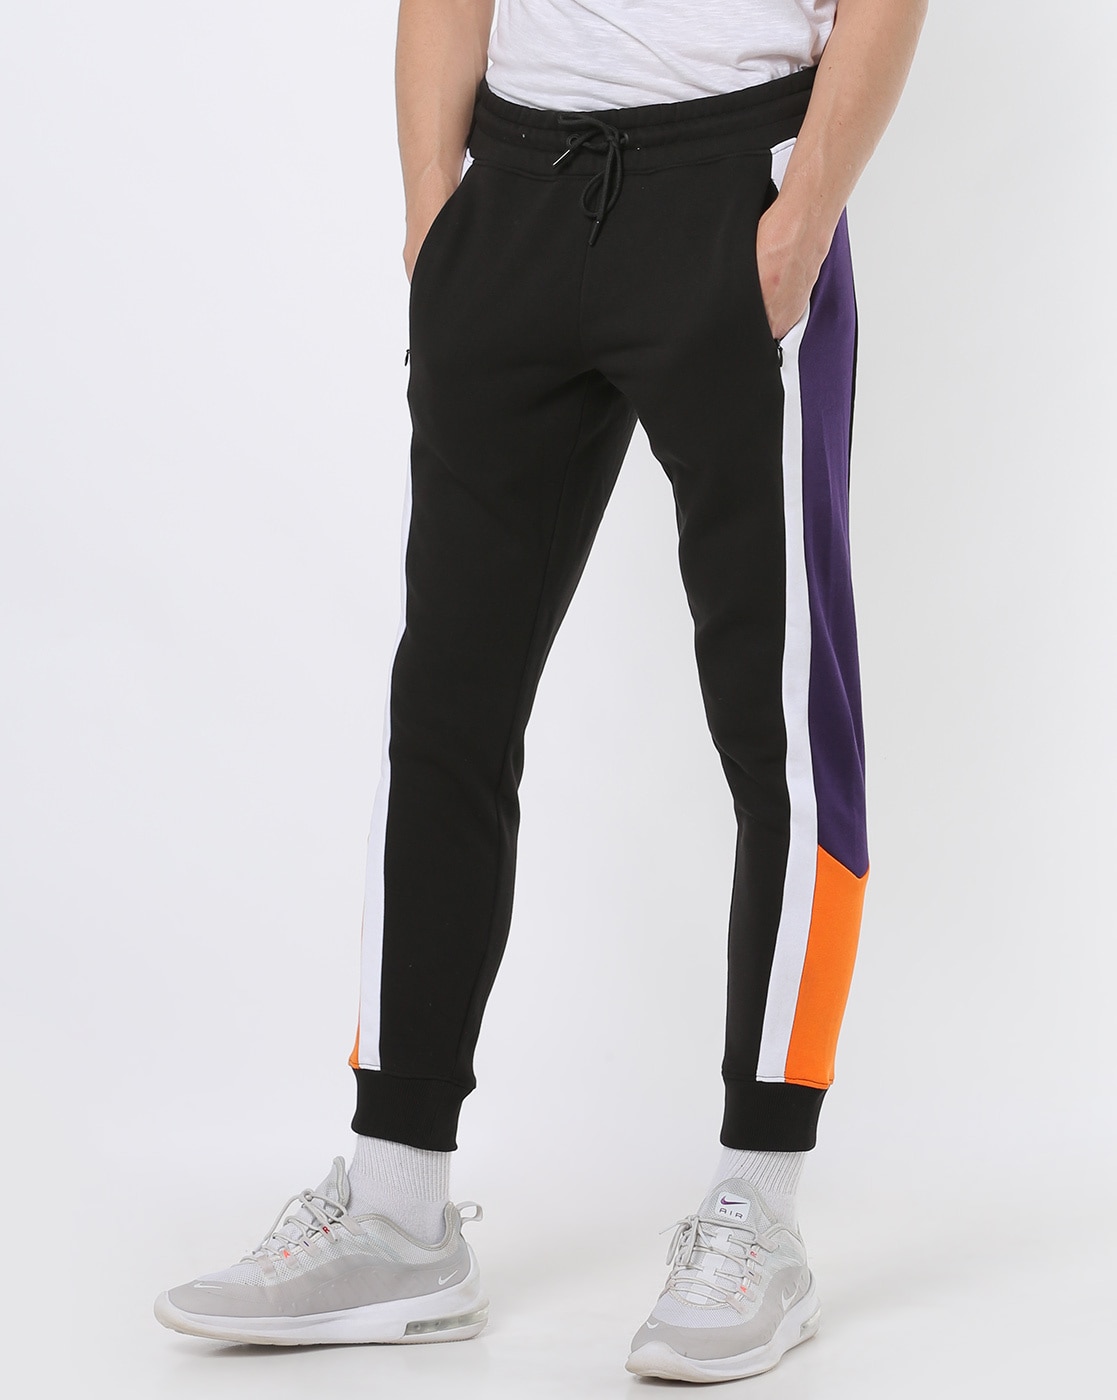 FLOWLESS Passion of FashionsCombo of Regular Fit Lycra Mens Track Pant   Lower  Pyjama  Track Pant for MenBlackPurple28  Amazonin Clothing   Accessories